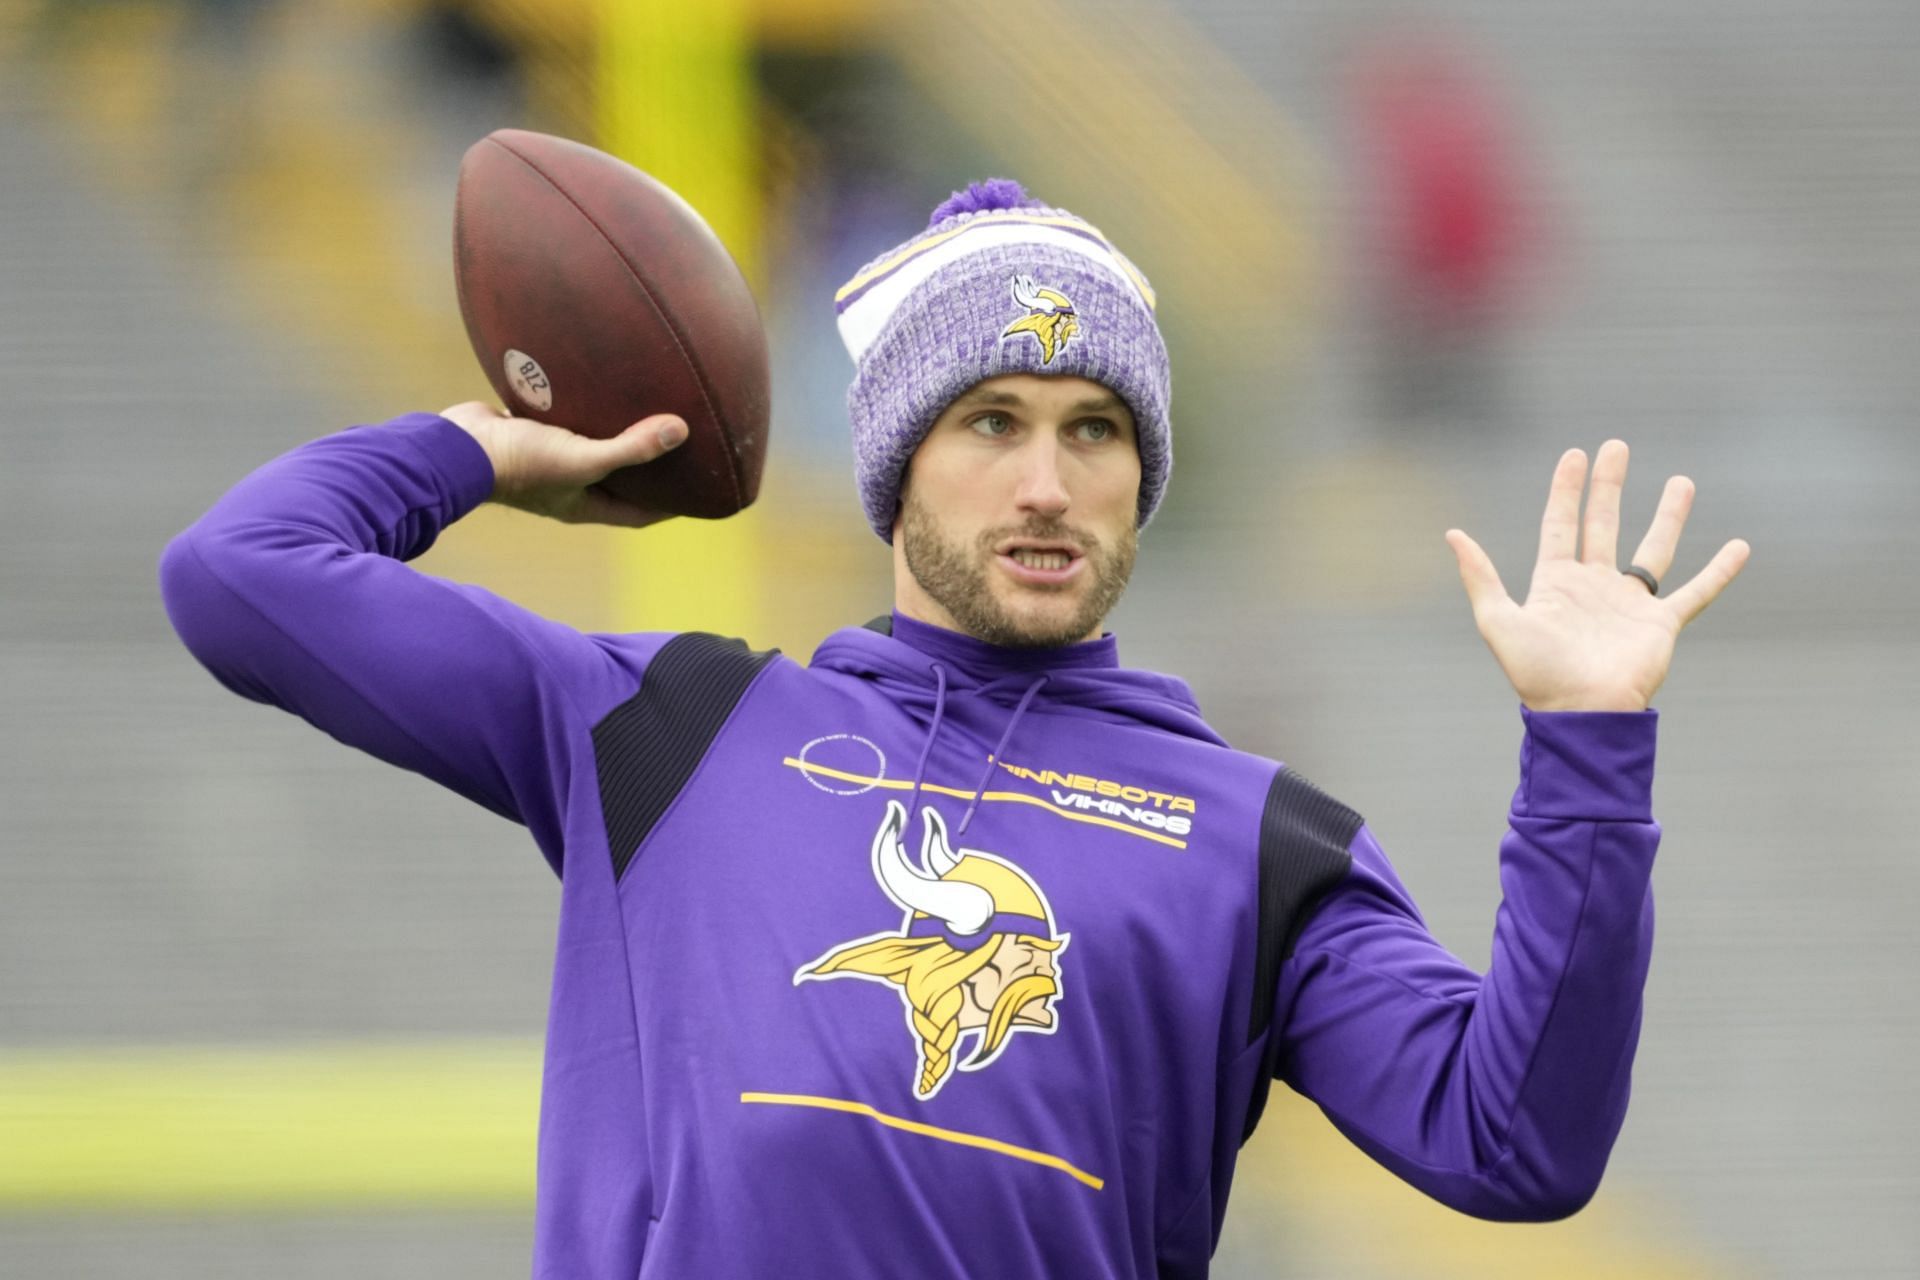 Kirk Cousins warms up v Green Bay Packers